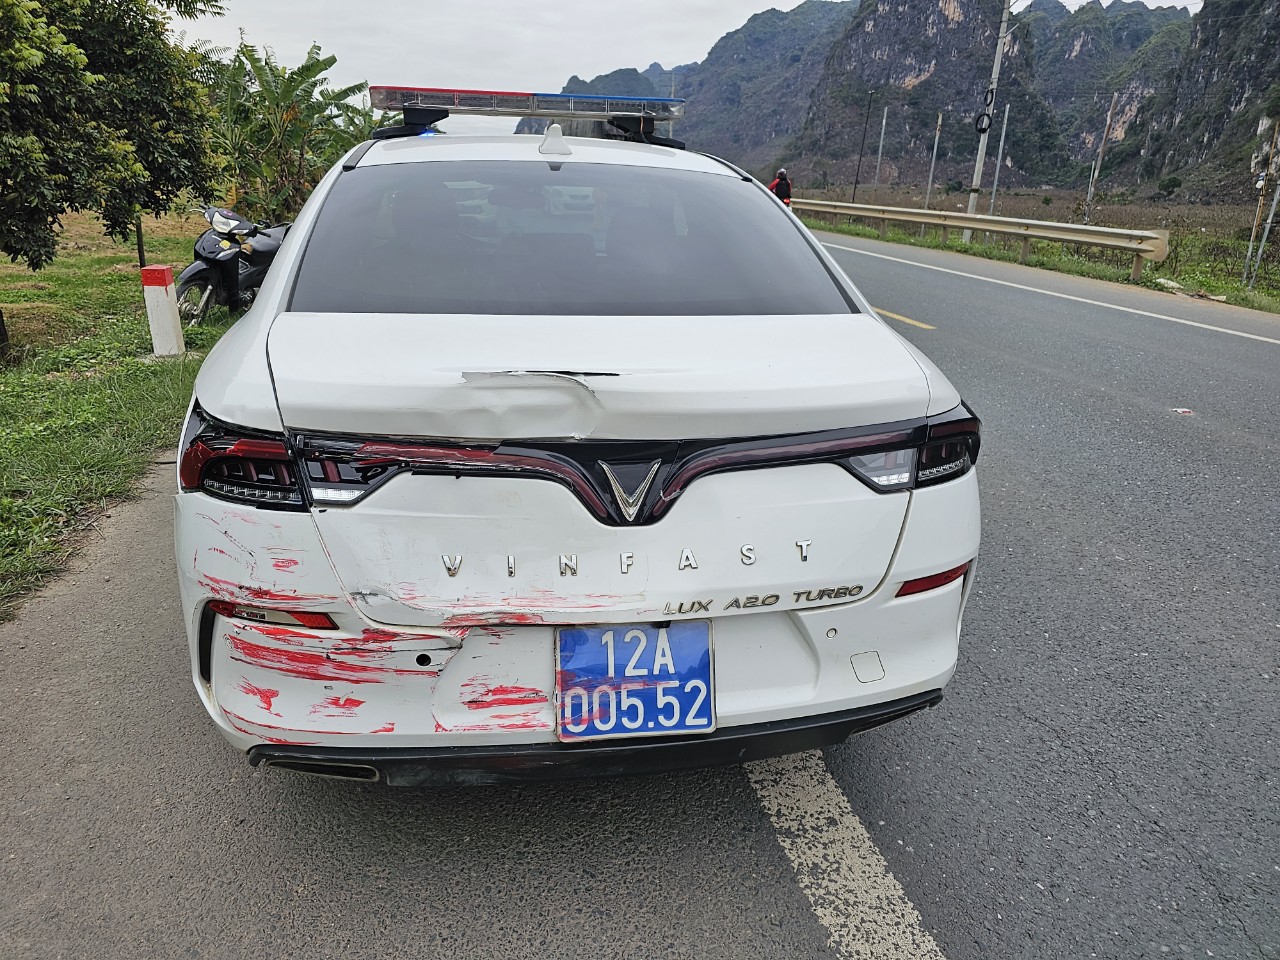 The damaged police car is pictured. Photo: Supplied